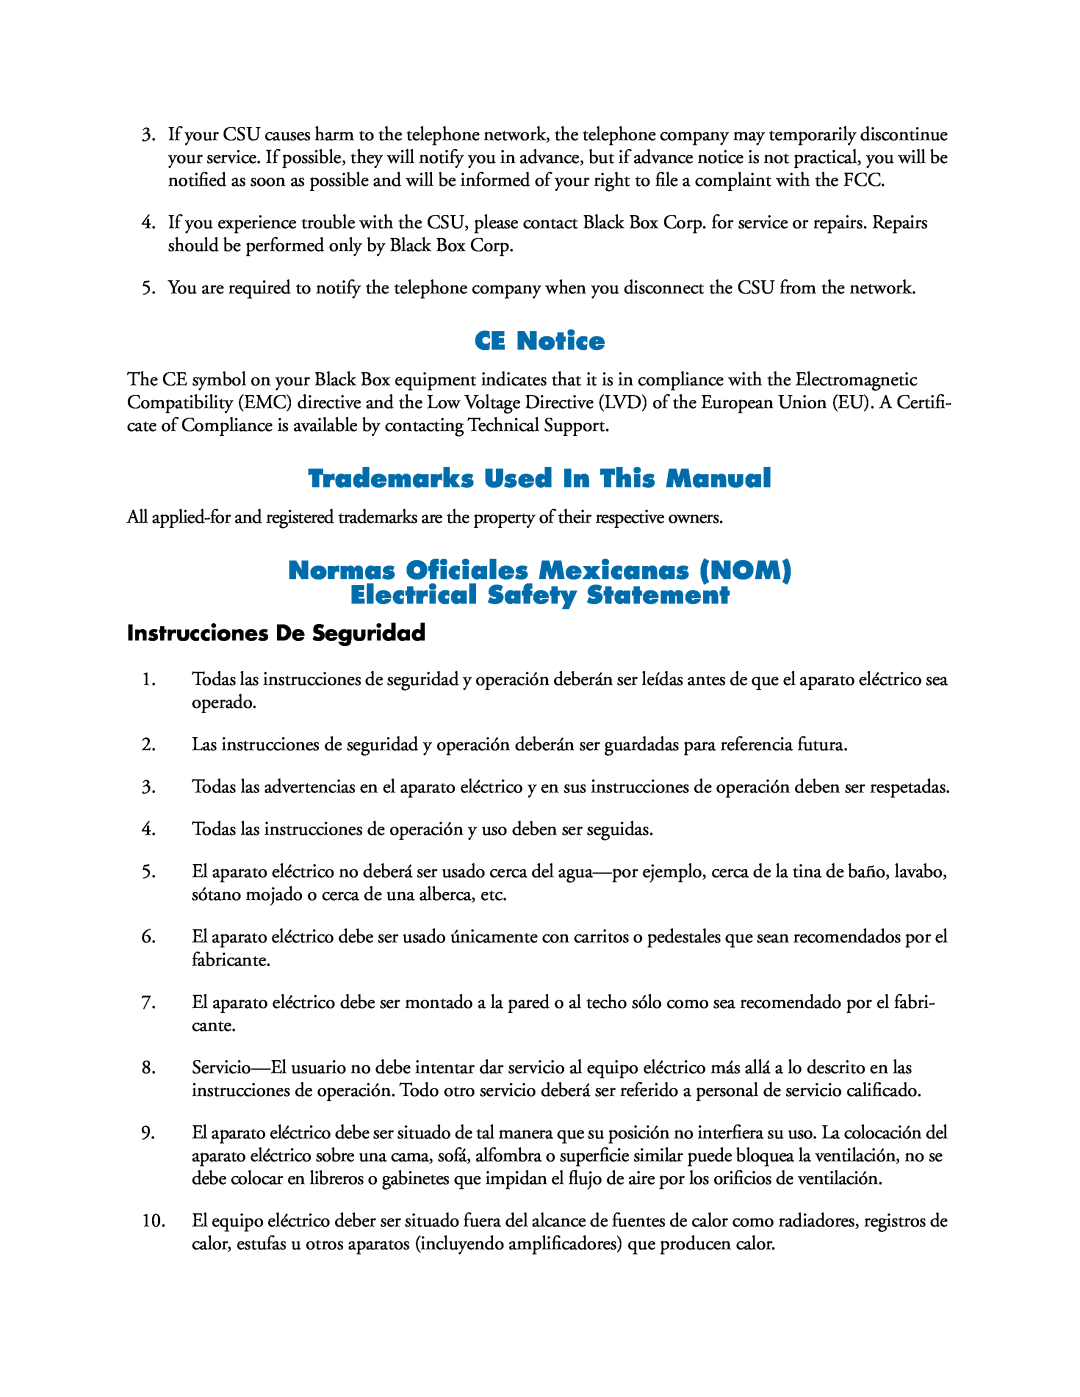 Black Box LRA2900A CE Notice, Trademarks Used In This Manual, Normas Oﬁciales Mexicanas NOM, Electrical Safety Statement 